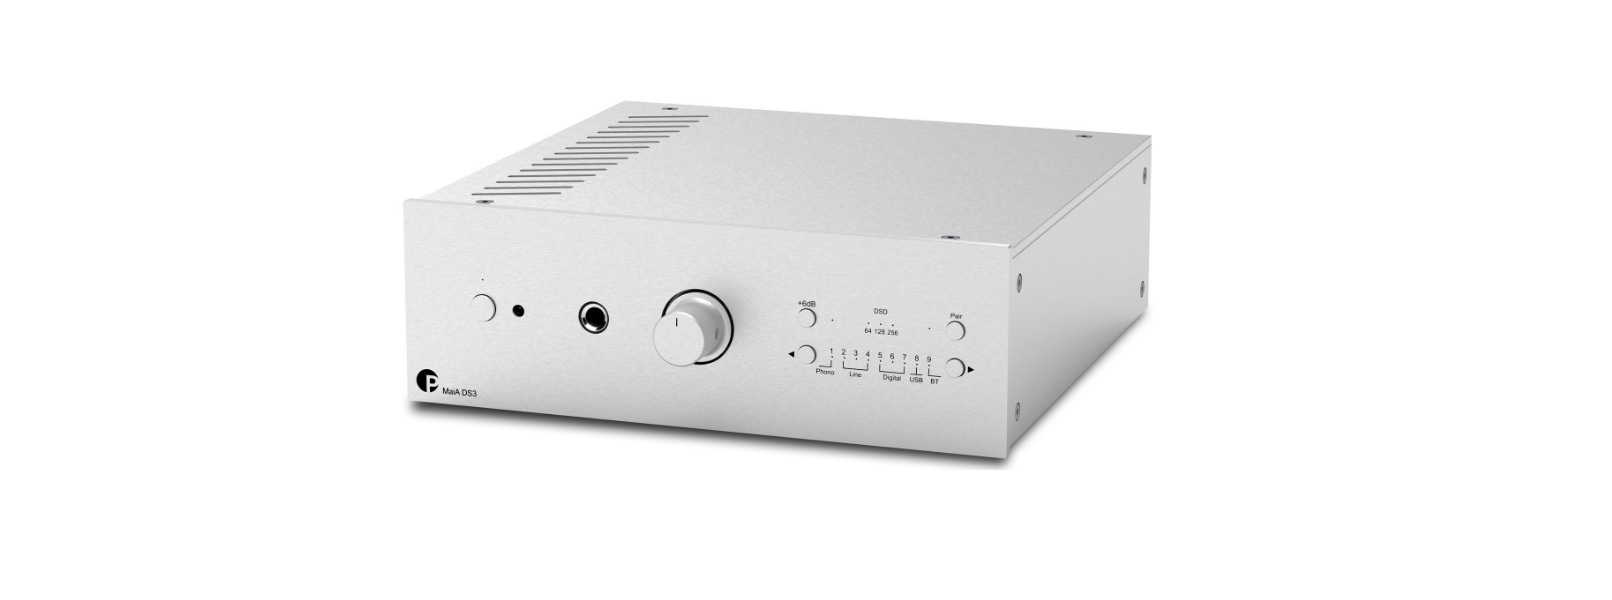 Pro-Ject MaiA DS3 Stereo Box S3 BT Amplifiers